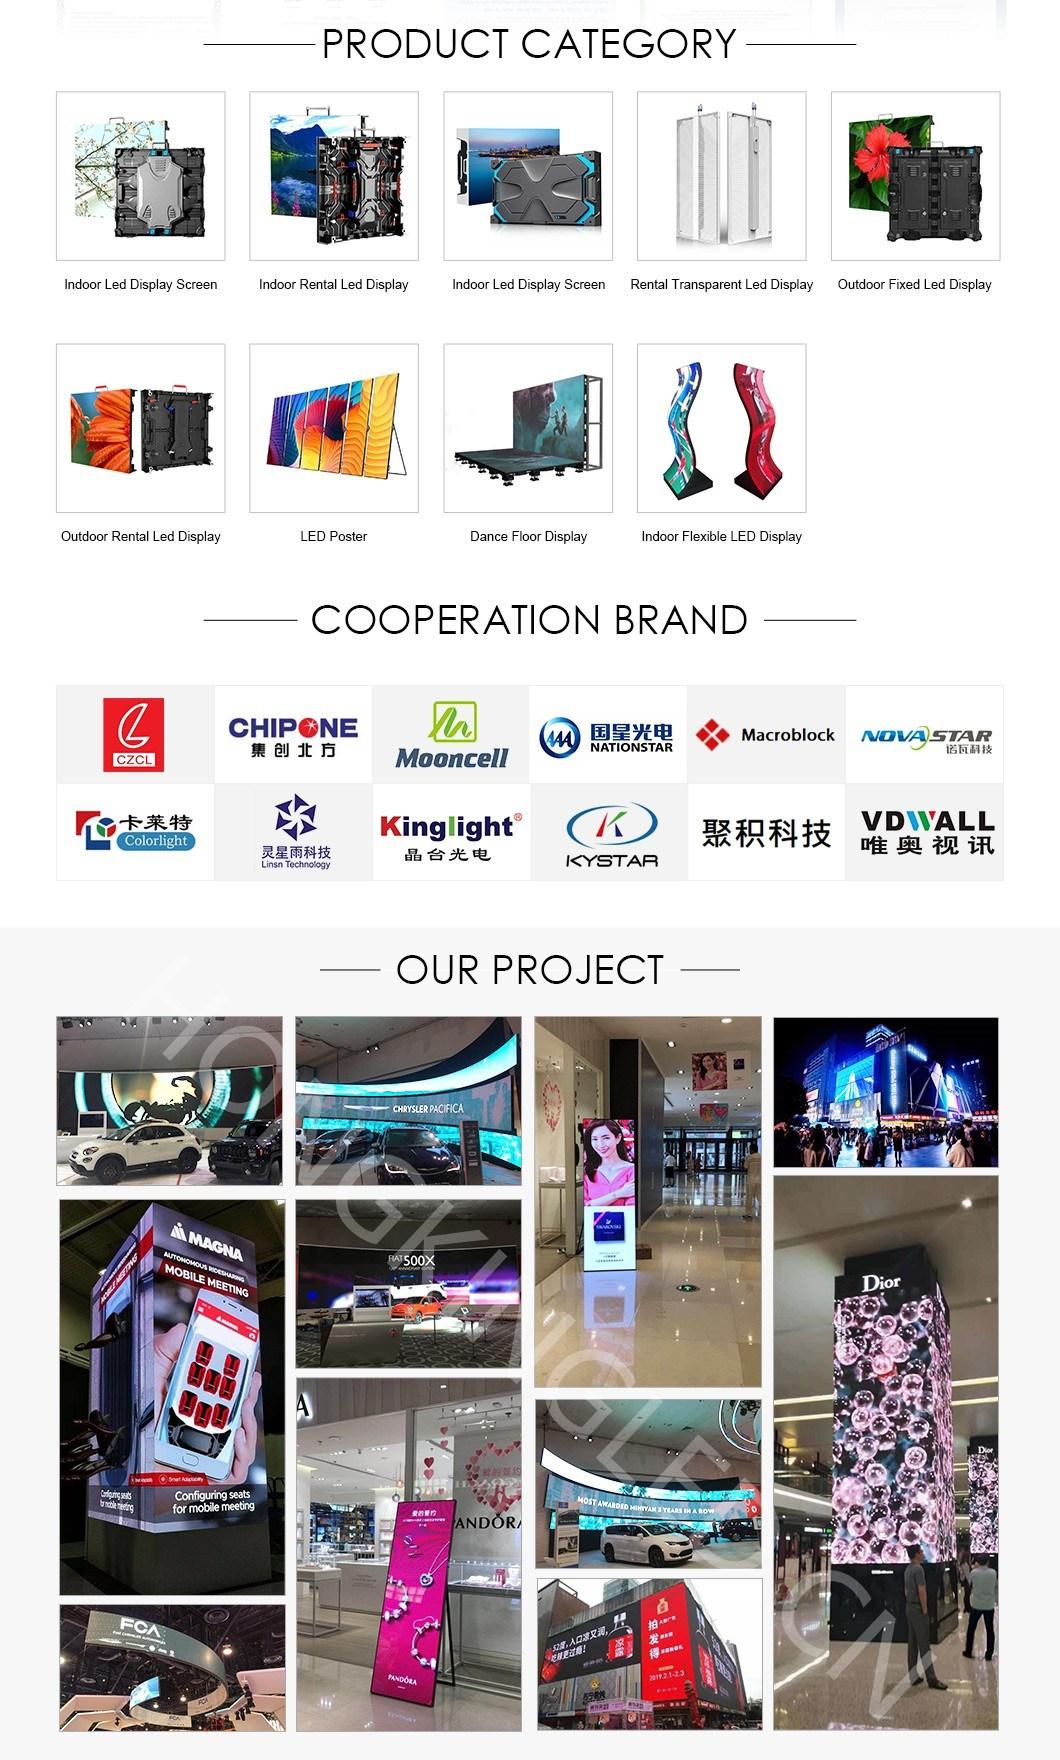 8K P1.56 P1.667 P1.875 P1.923 LED Display Screen Signage for Advertising